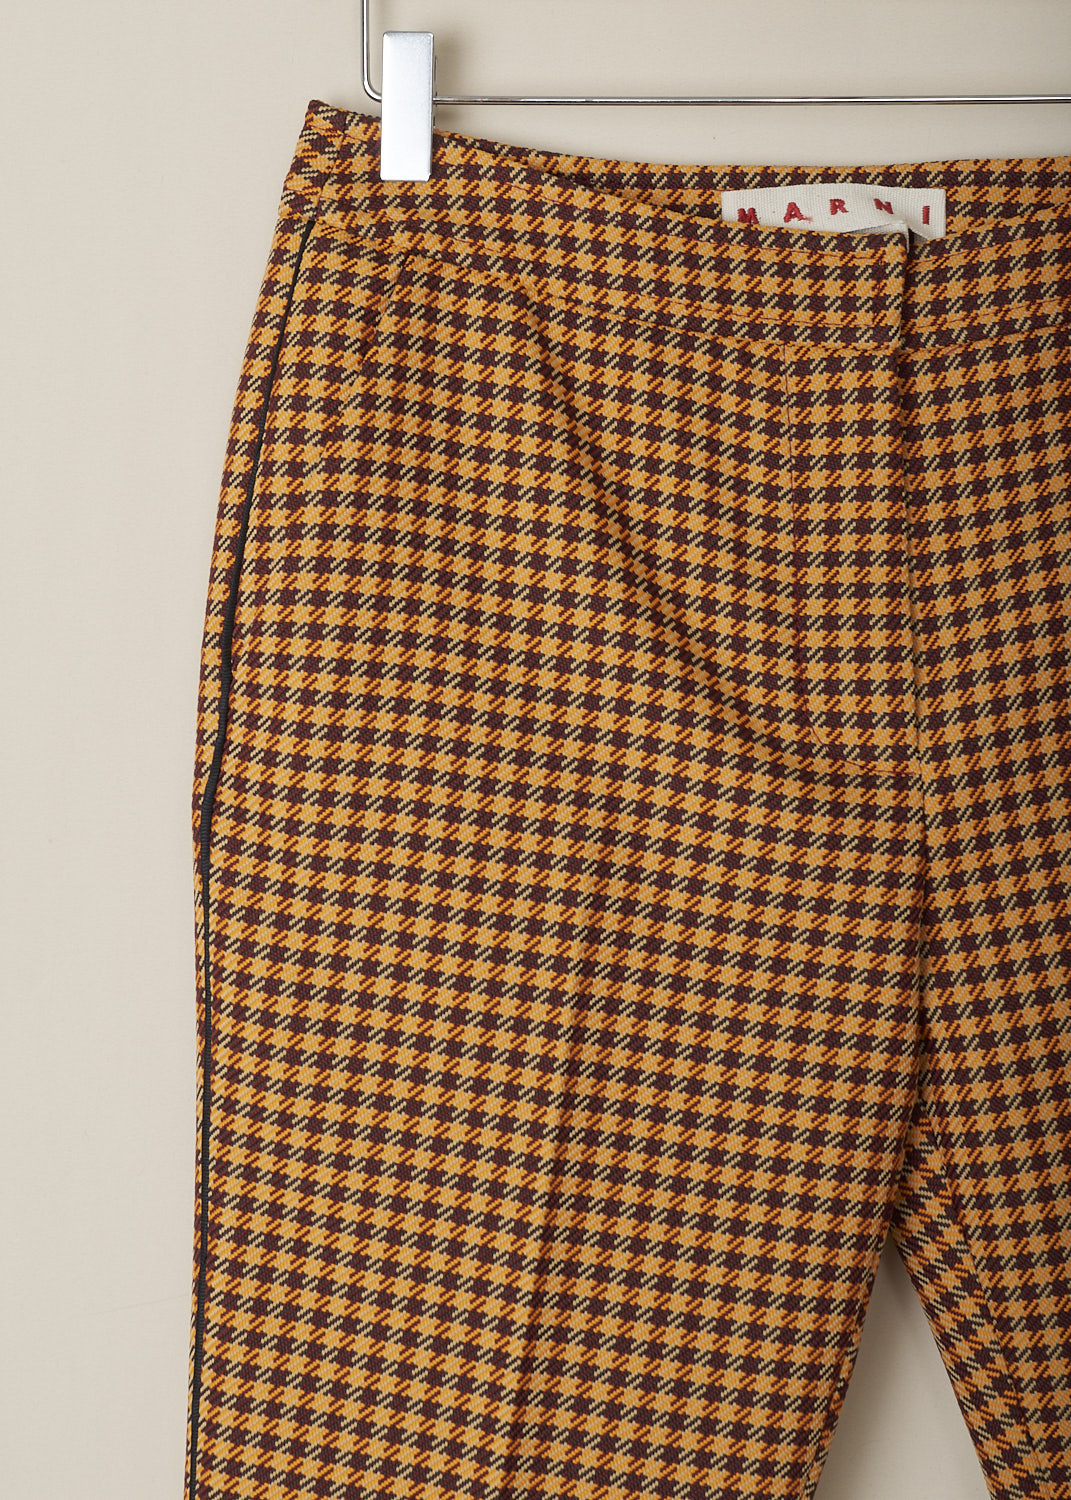 MARNI, ORANGE HOUNDSTOOTH PANTS, PAMA0341IM_UTP730_CHR79, Orange, Print, Detail, These mid-rise orange Houndstooth pants has a narrow waistband and a concealed clasp and zip closure. These pants have slanted pockets in the front and welt pockets in the back. Black piping runs along the side seams and centre creases run along the length of the pant legs. 
